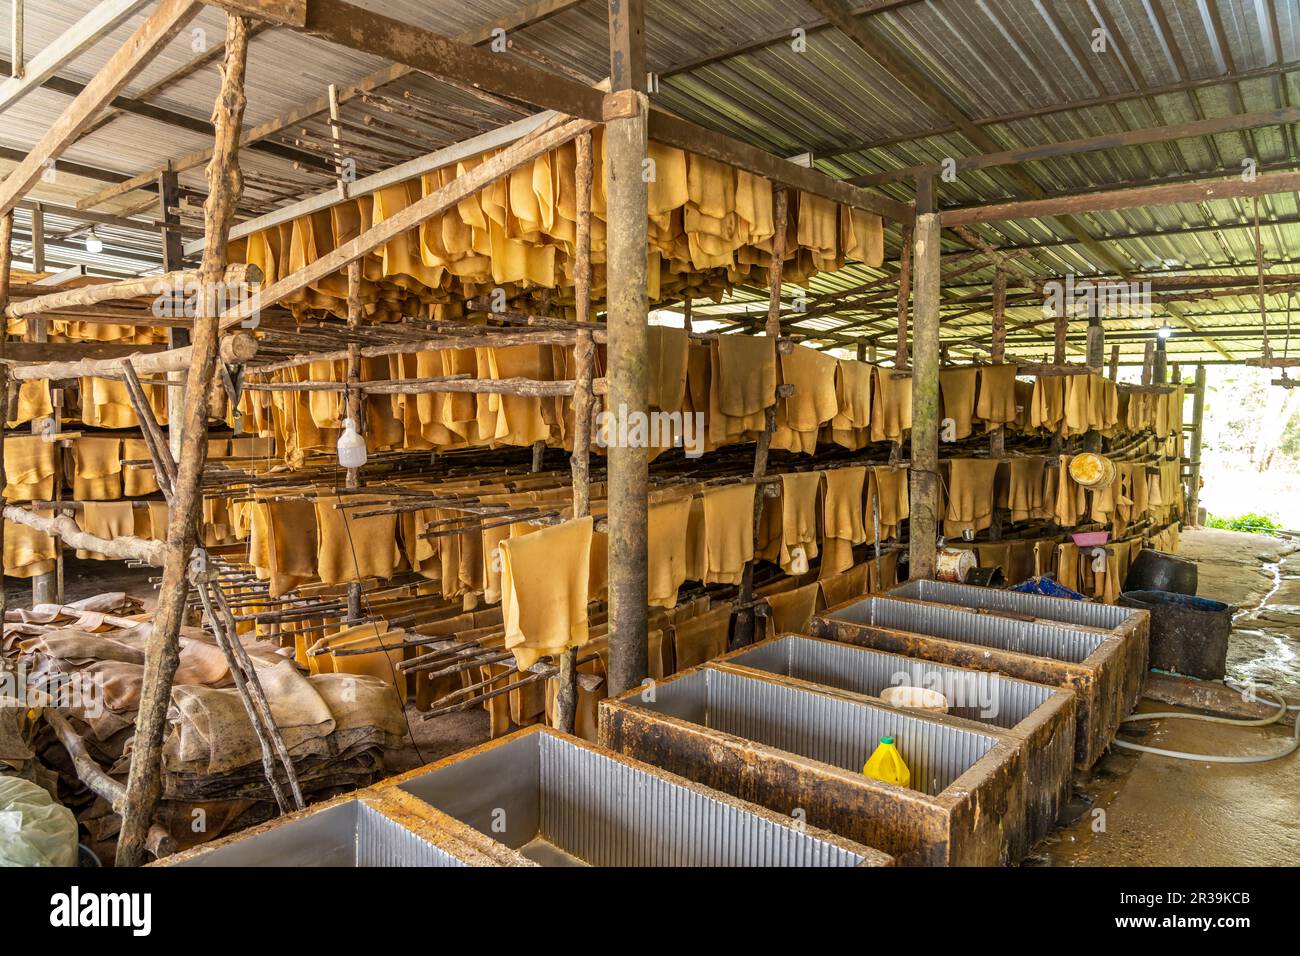 Kautschuk Produktion auf der Insel Koh Libong in der Andamanensee, Thailand, Asien   |  Natural rubber production on Ko Libong, island in the Andaman Stock Photo